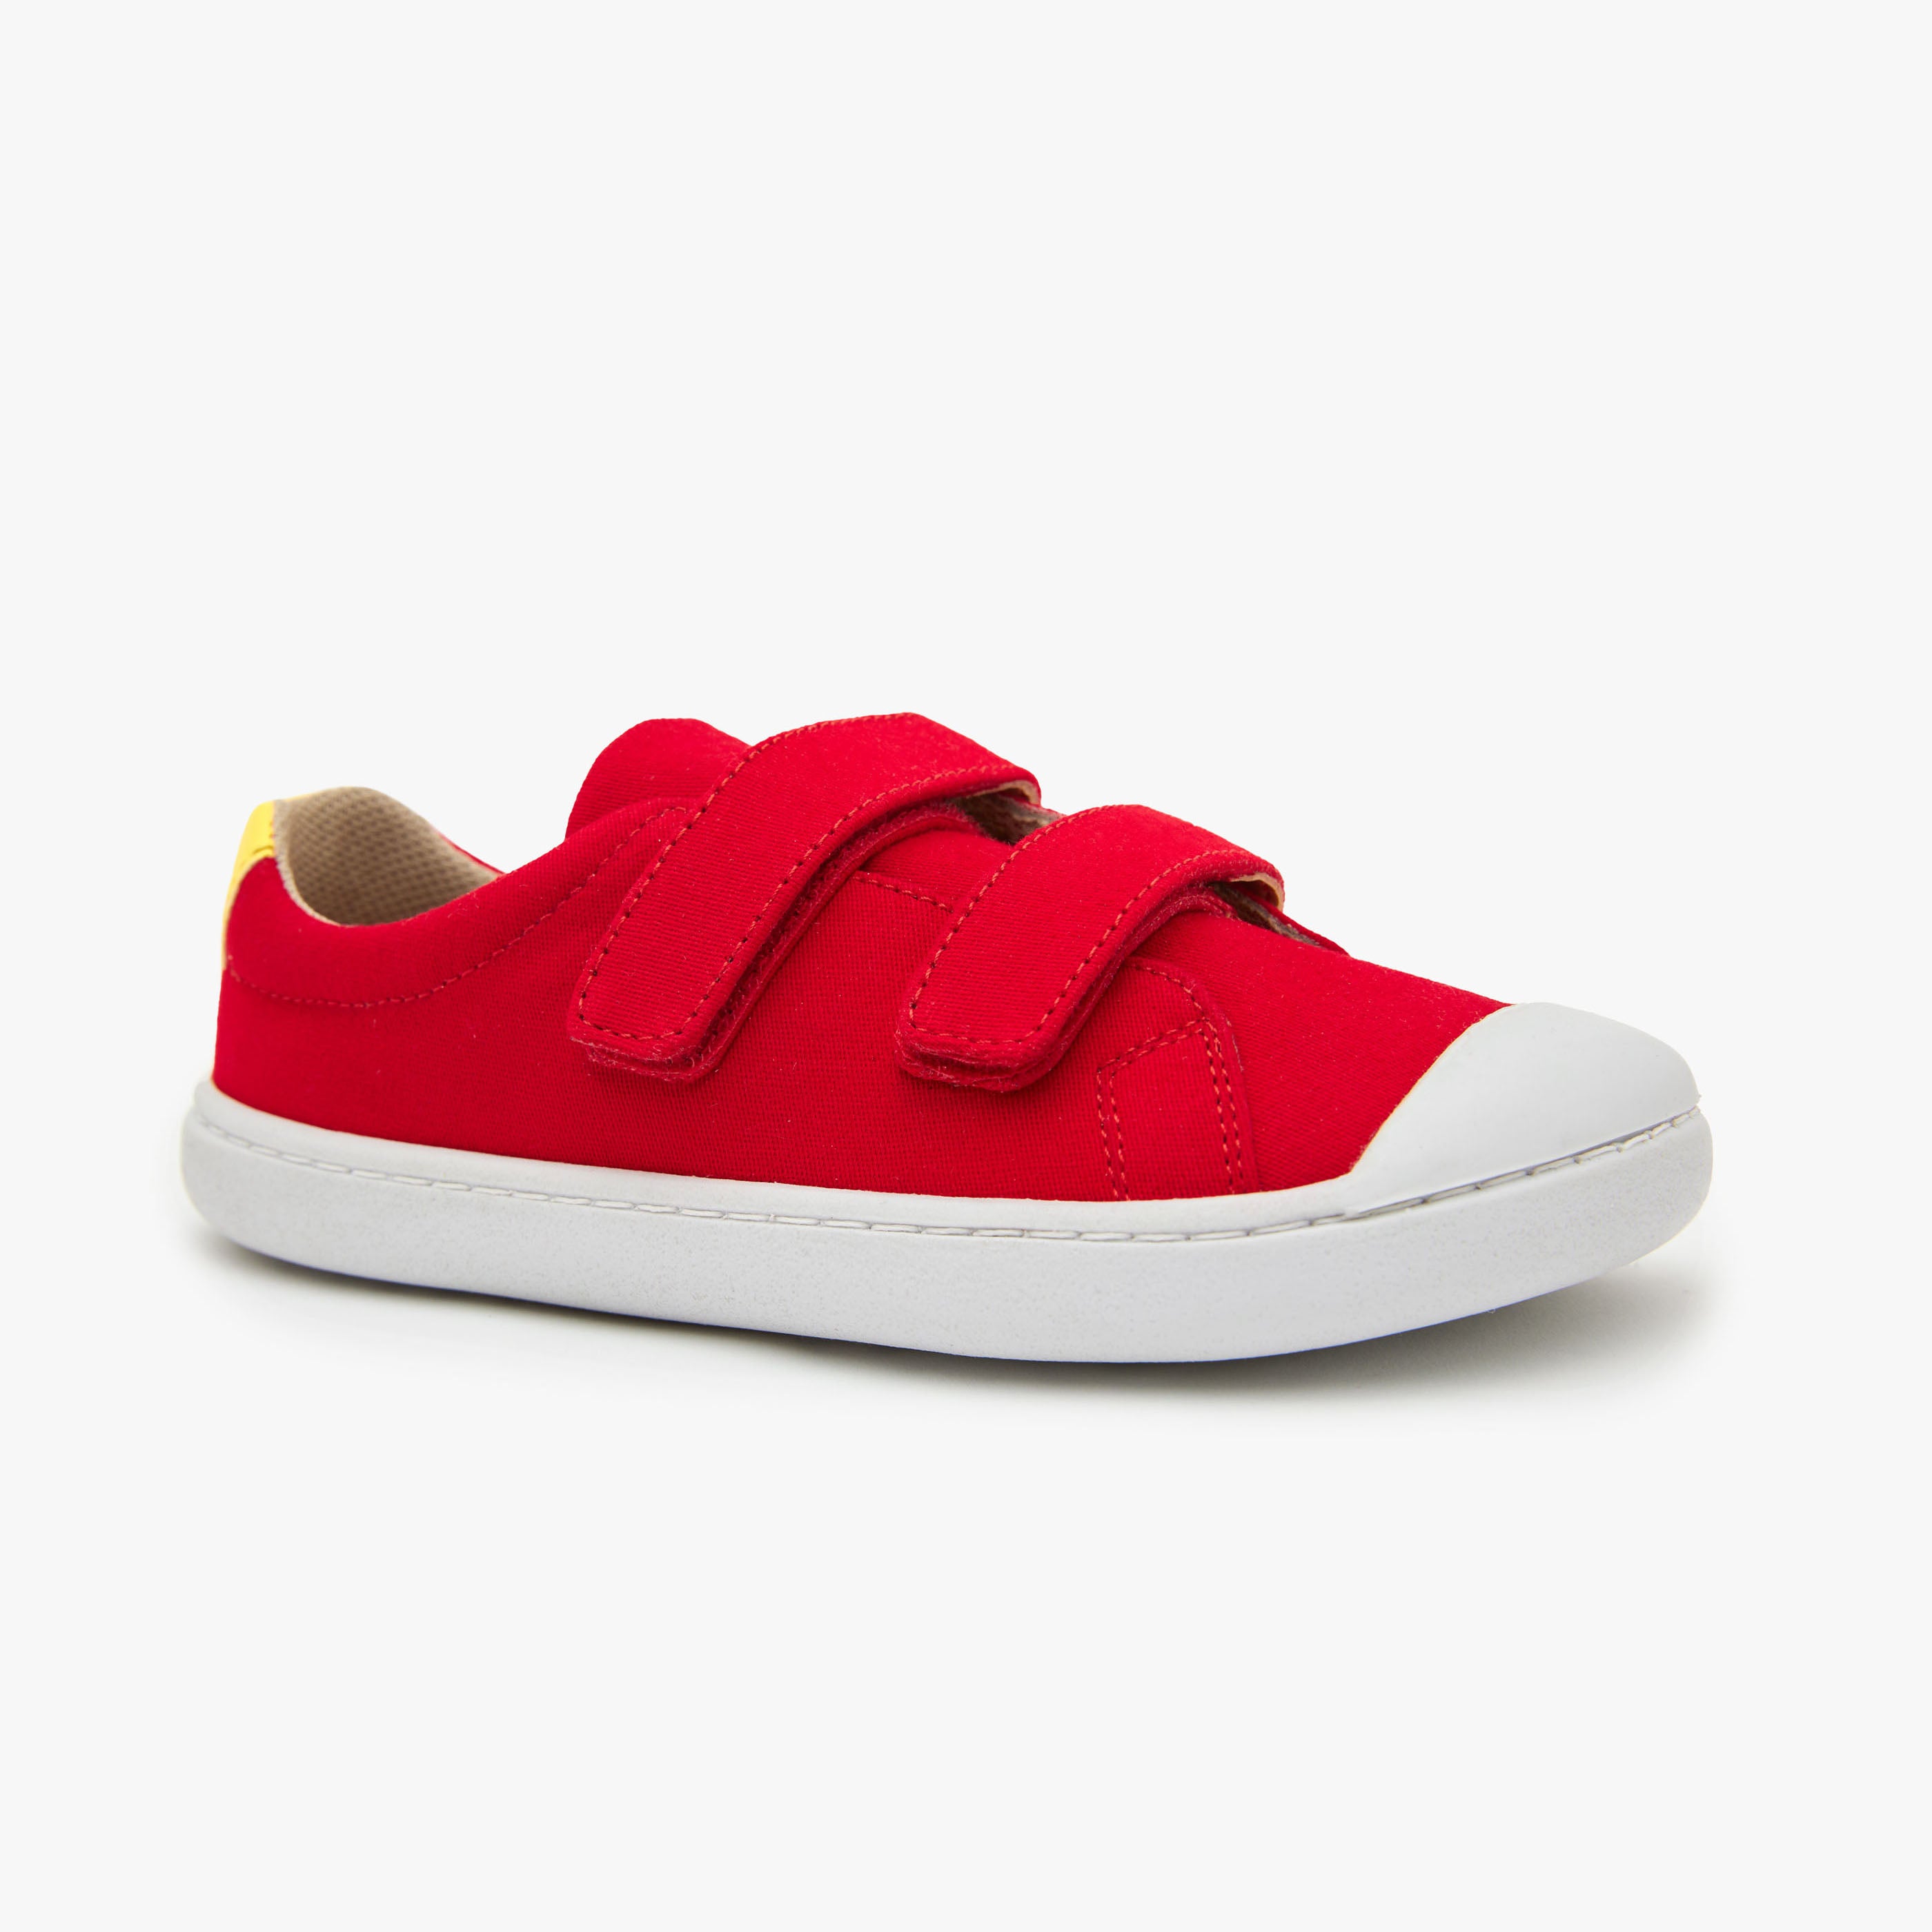 Toddler Boys Girls Canvas Sneakers, 70s Love Heart Low High Top Shoes For  Kids Youth From Cctv10086, $23.02 | DHgate.Com